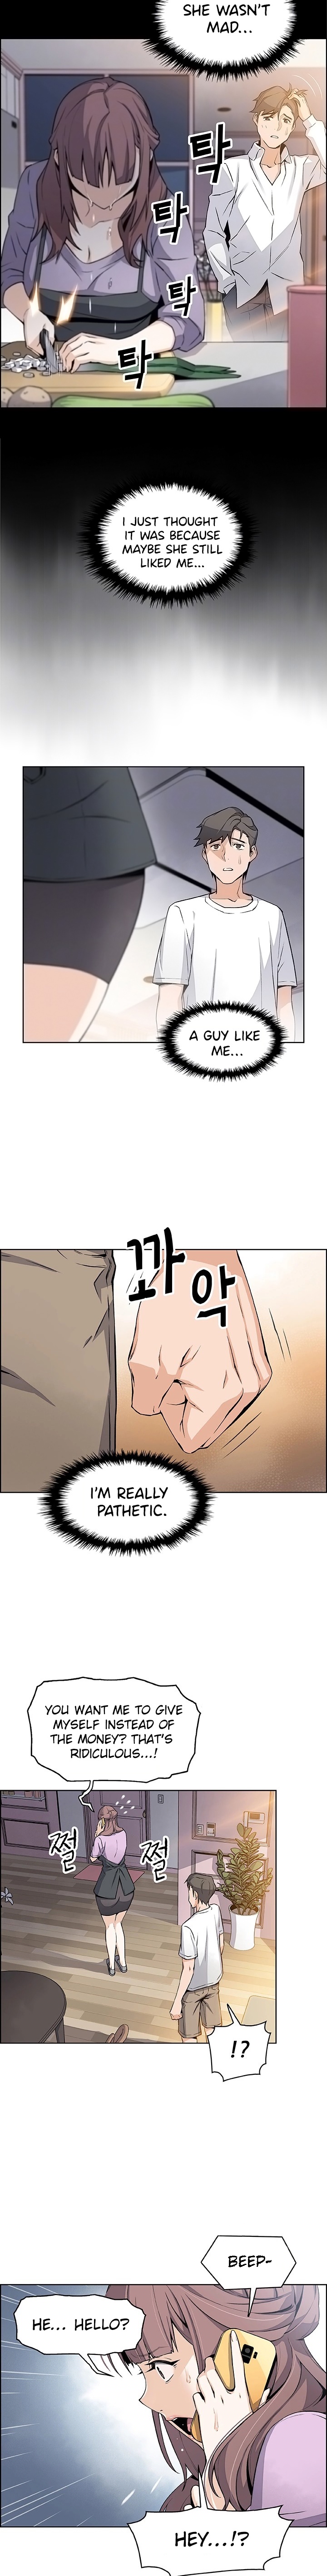 Housekeeper Manhwa - Chapter 22 Page 3